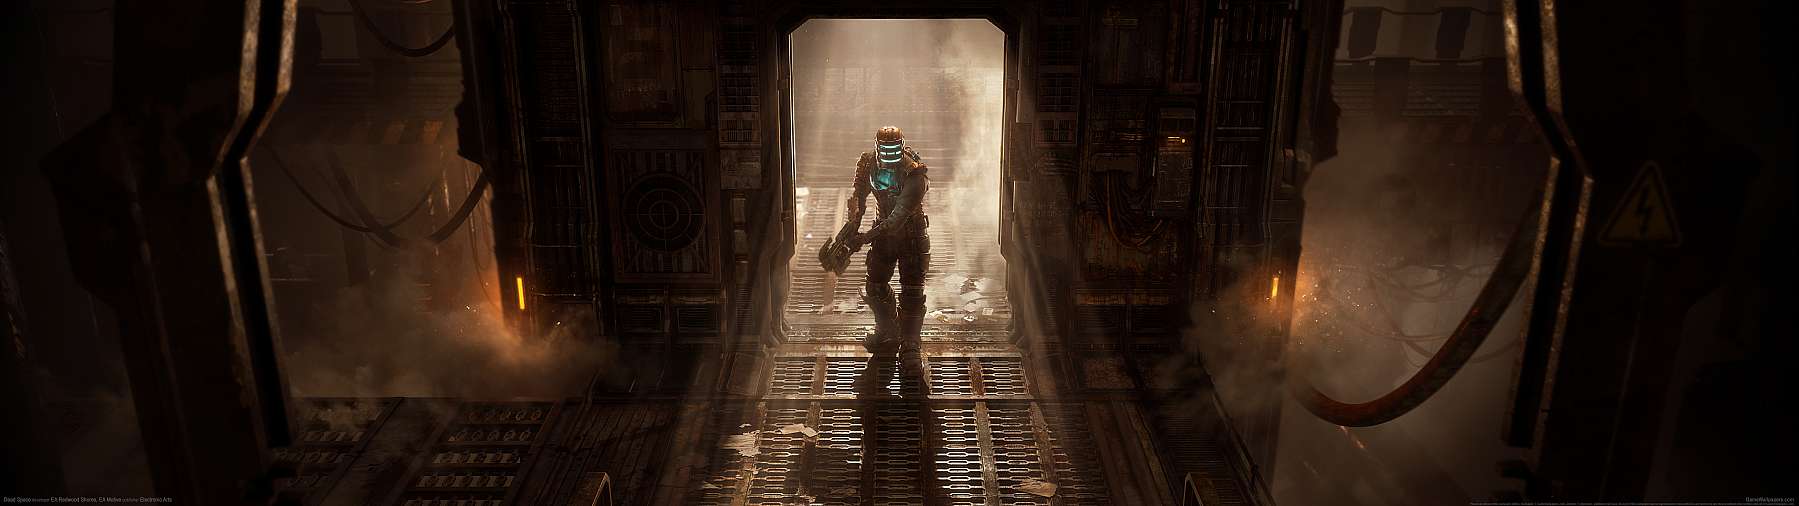 Dead Space superwide wallpaper or background 11